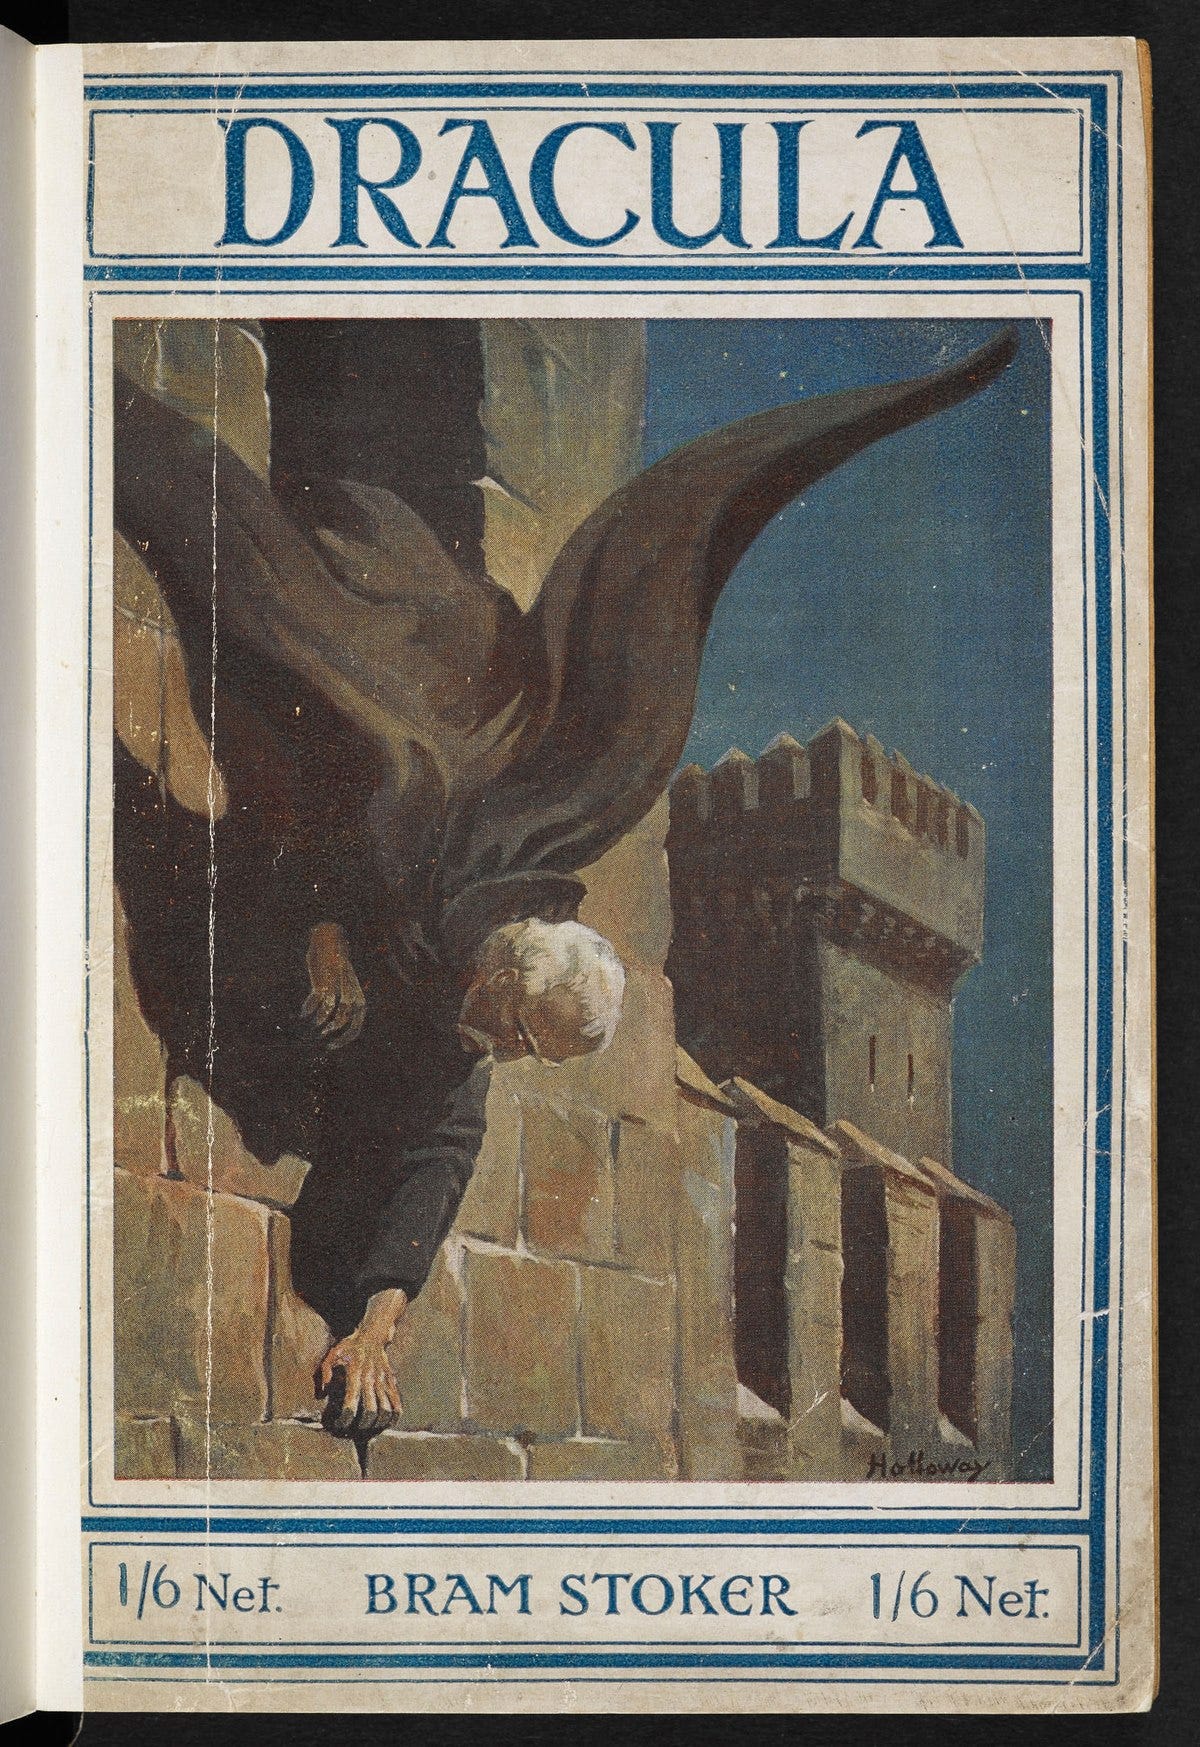 File:Dracula - Front Cover 1919 Edition.jpg - Wikimedia Commons